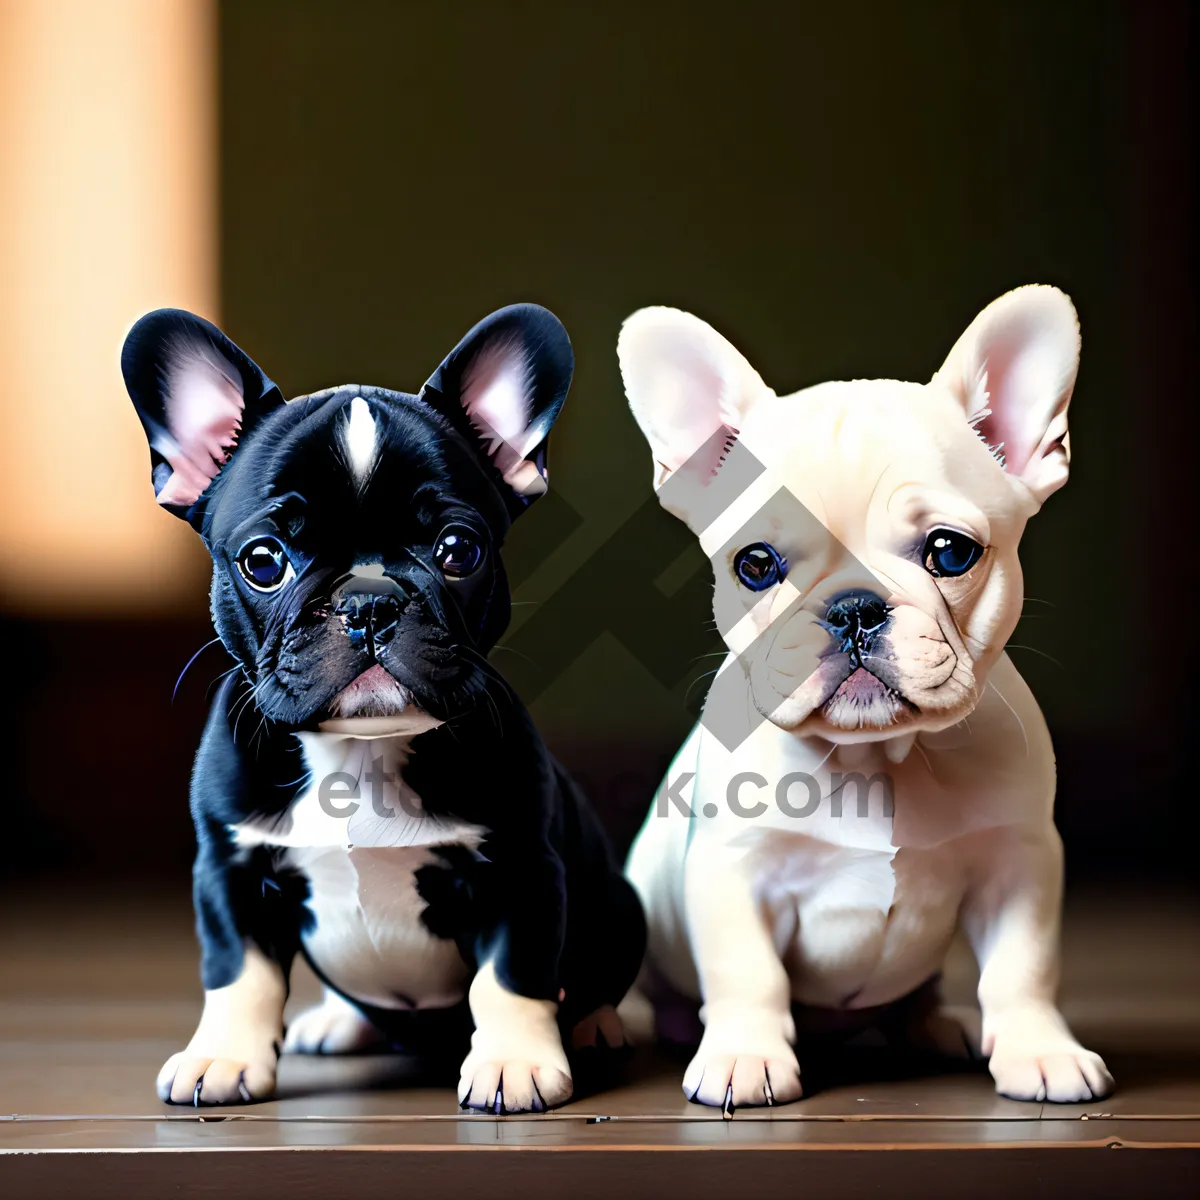 Picture of Introducing a lovable bulldog puppy, an irresistibly cute and wrinkled canine companion